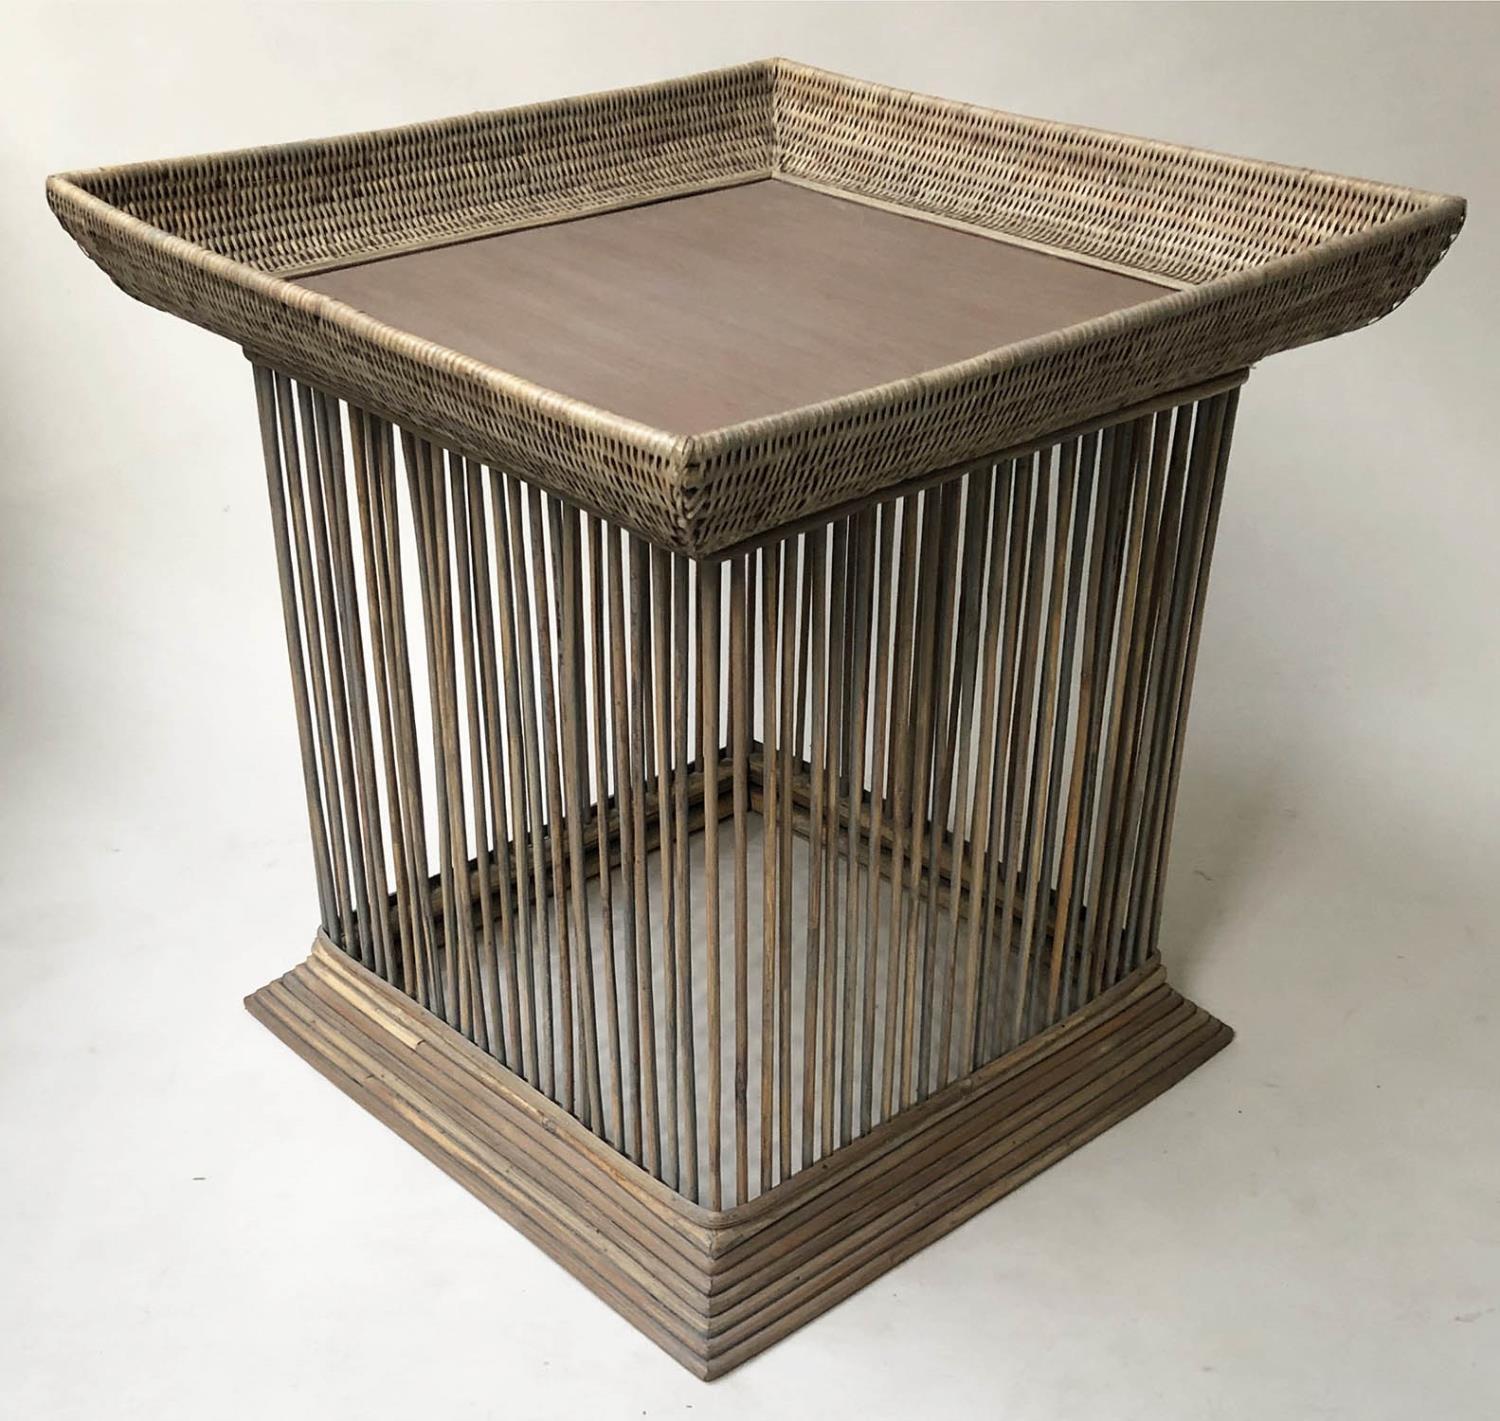 SIDE TABLES, a pair, beach house grey washed cane and rattan, 51cm x 51cm x 52cm H. - Image 2 of 4